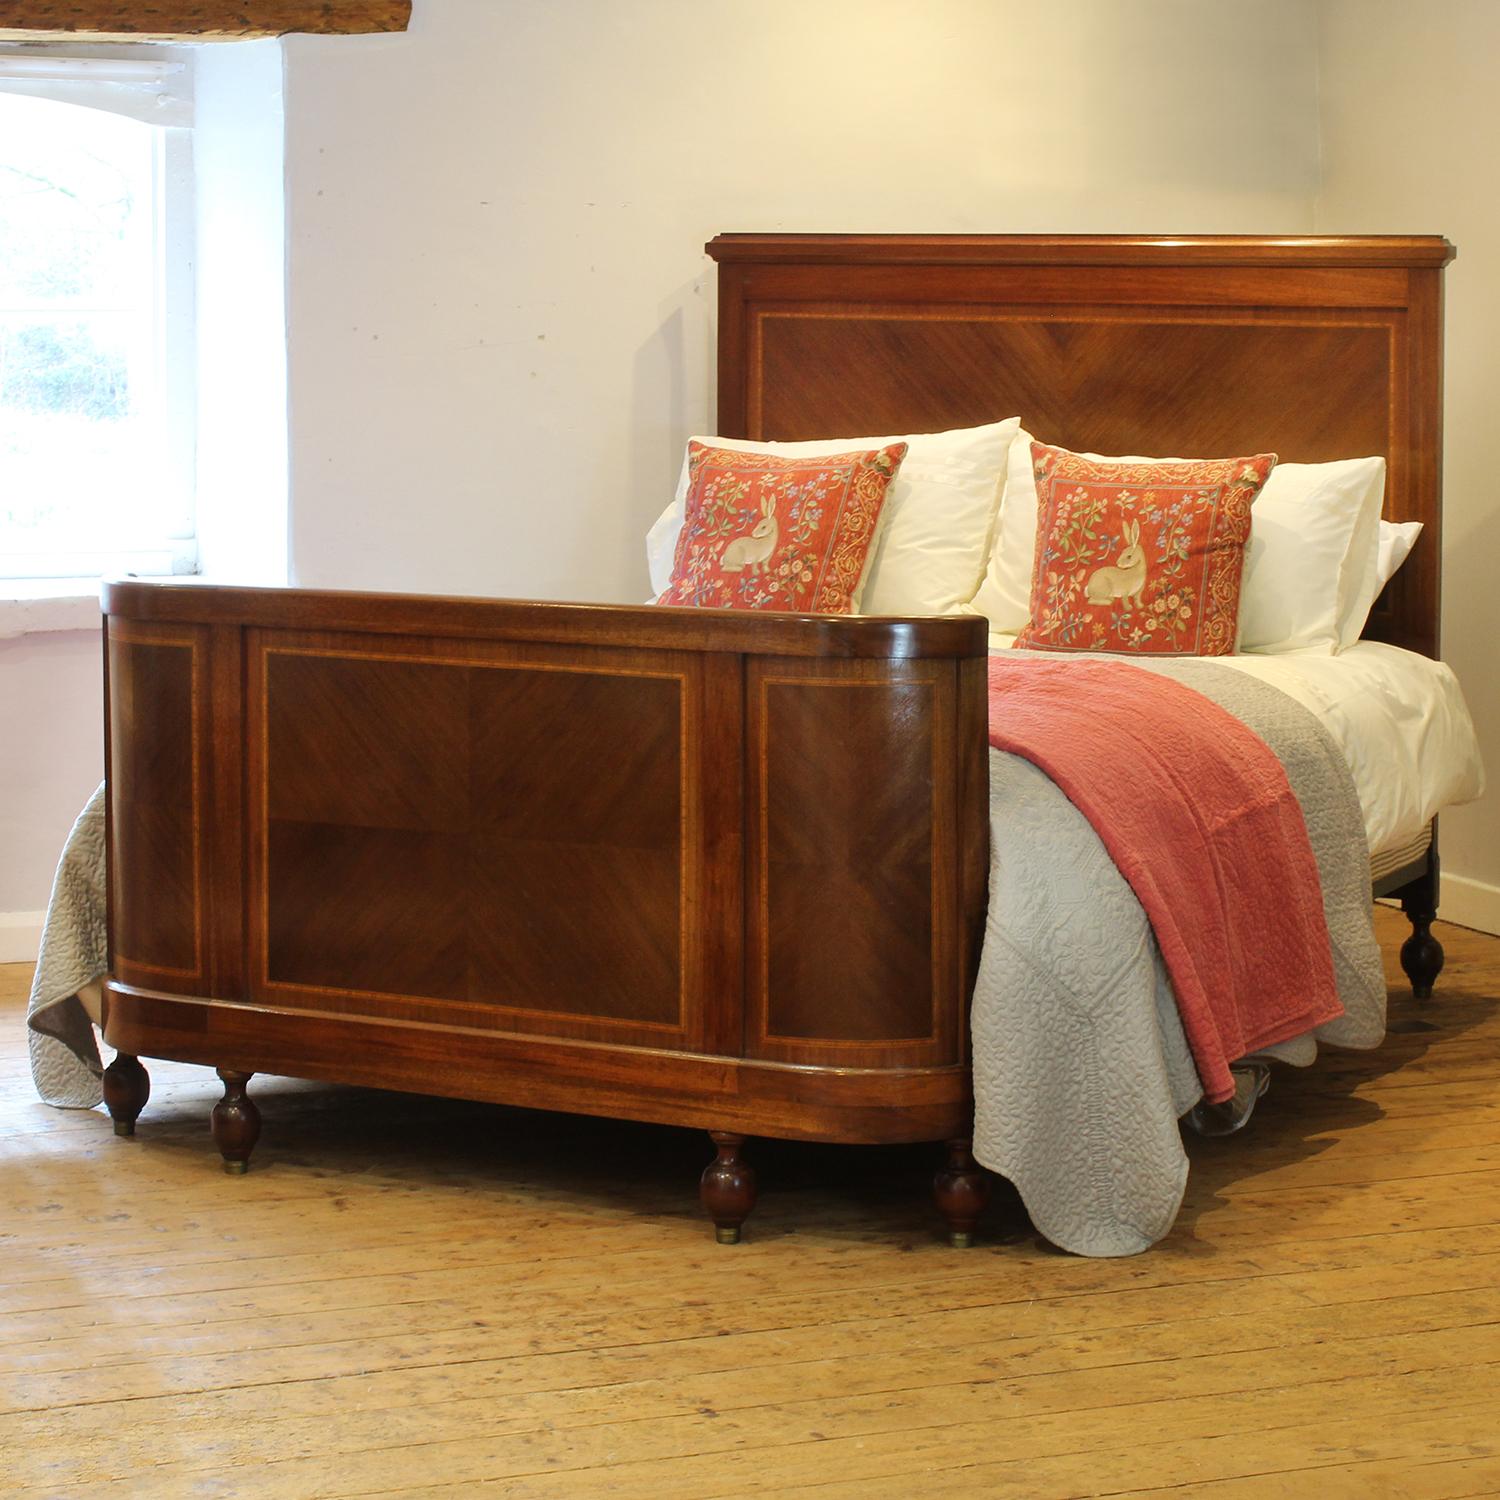 A superb example of an inlaid antique bed in mahogany with fine string inlay work, quartered veneered panels and bow foot end. 

This bed accepts a US Queen Size (or UK King Size), 5ft wide (60 in), base and mattress set.

The price includes a firm